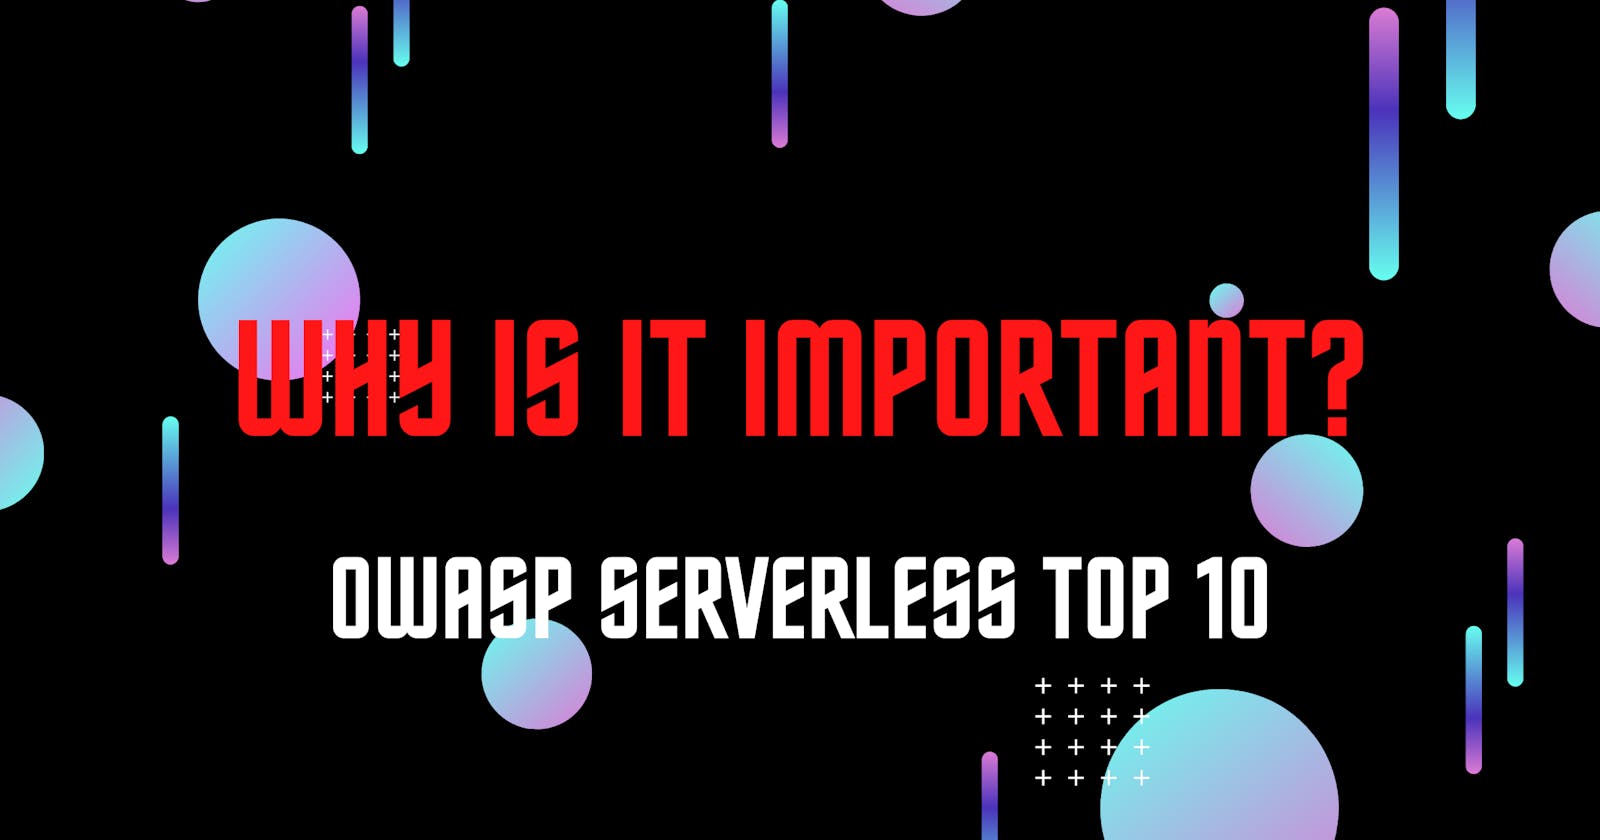 Overview of the OWASP Serverless Top 10 [videos]